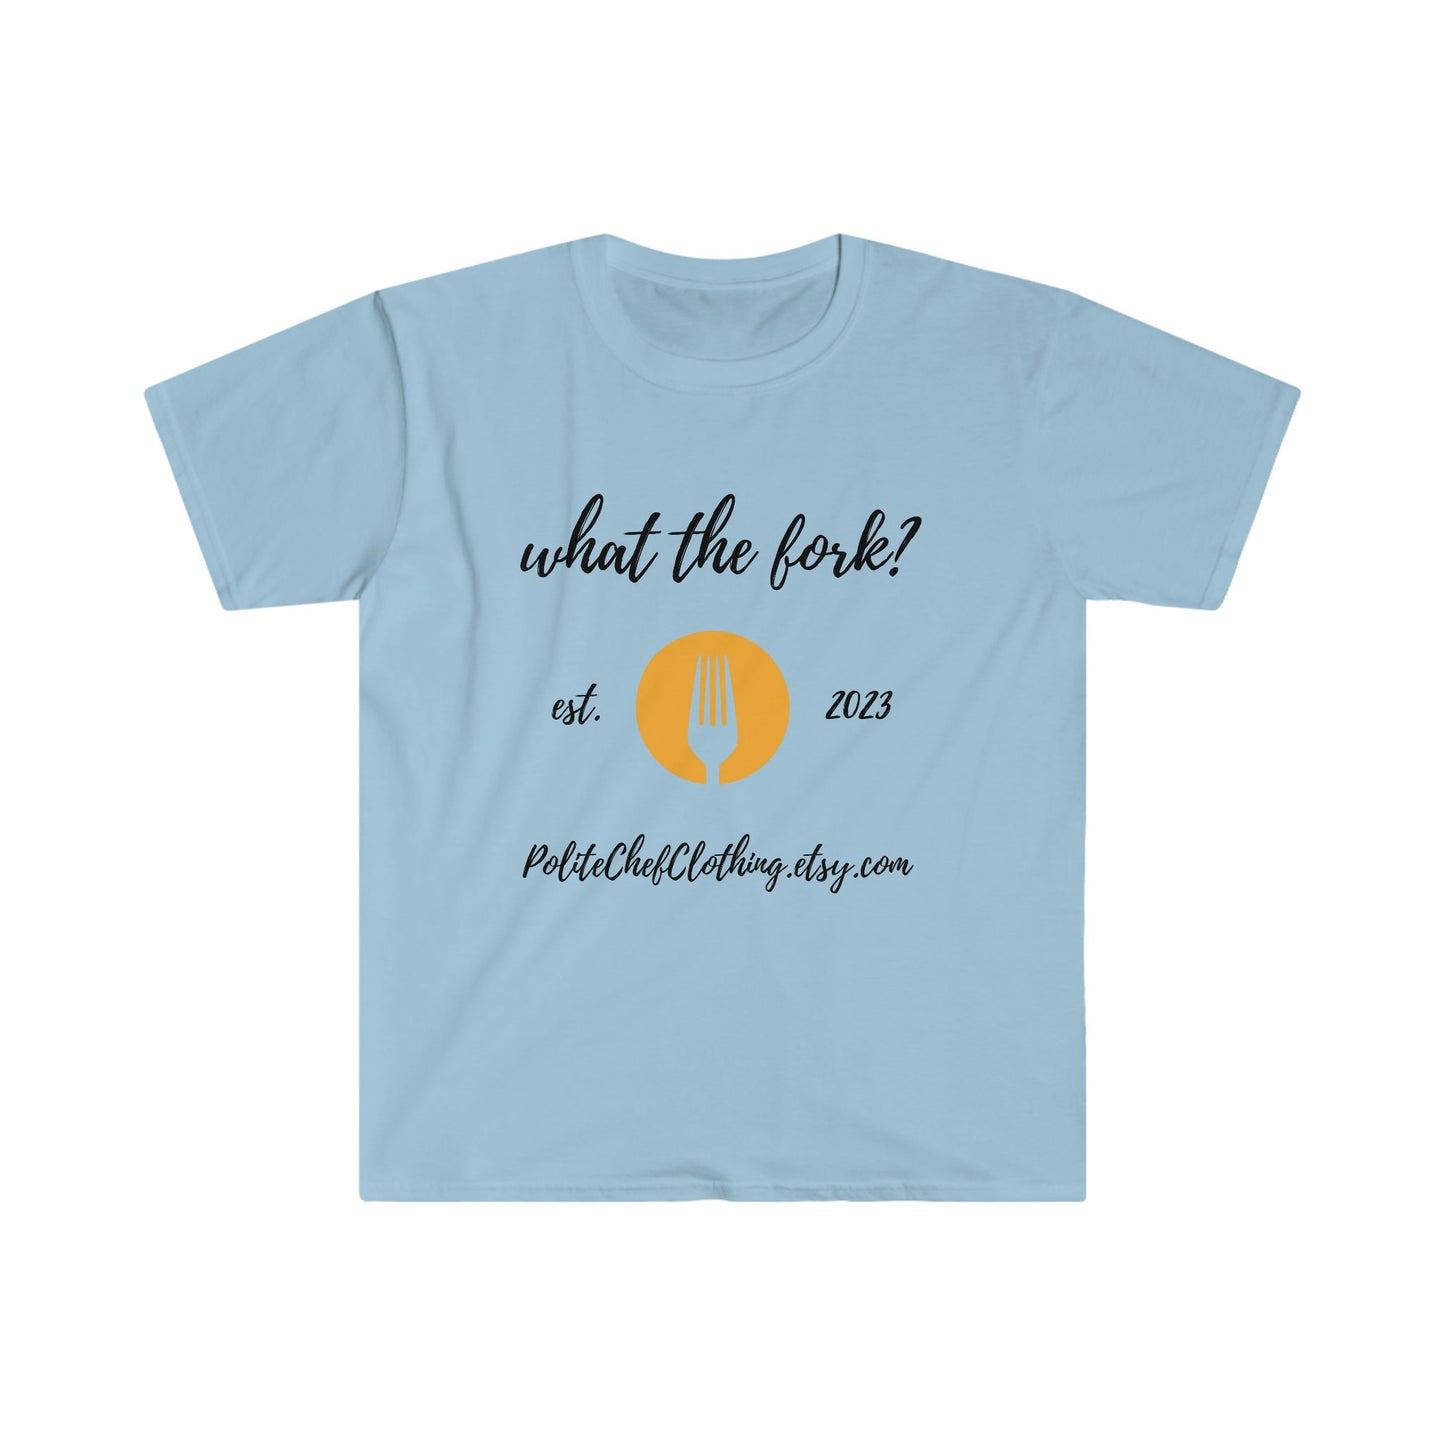 What the Fork Softstyle T-Shirt